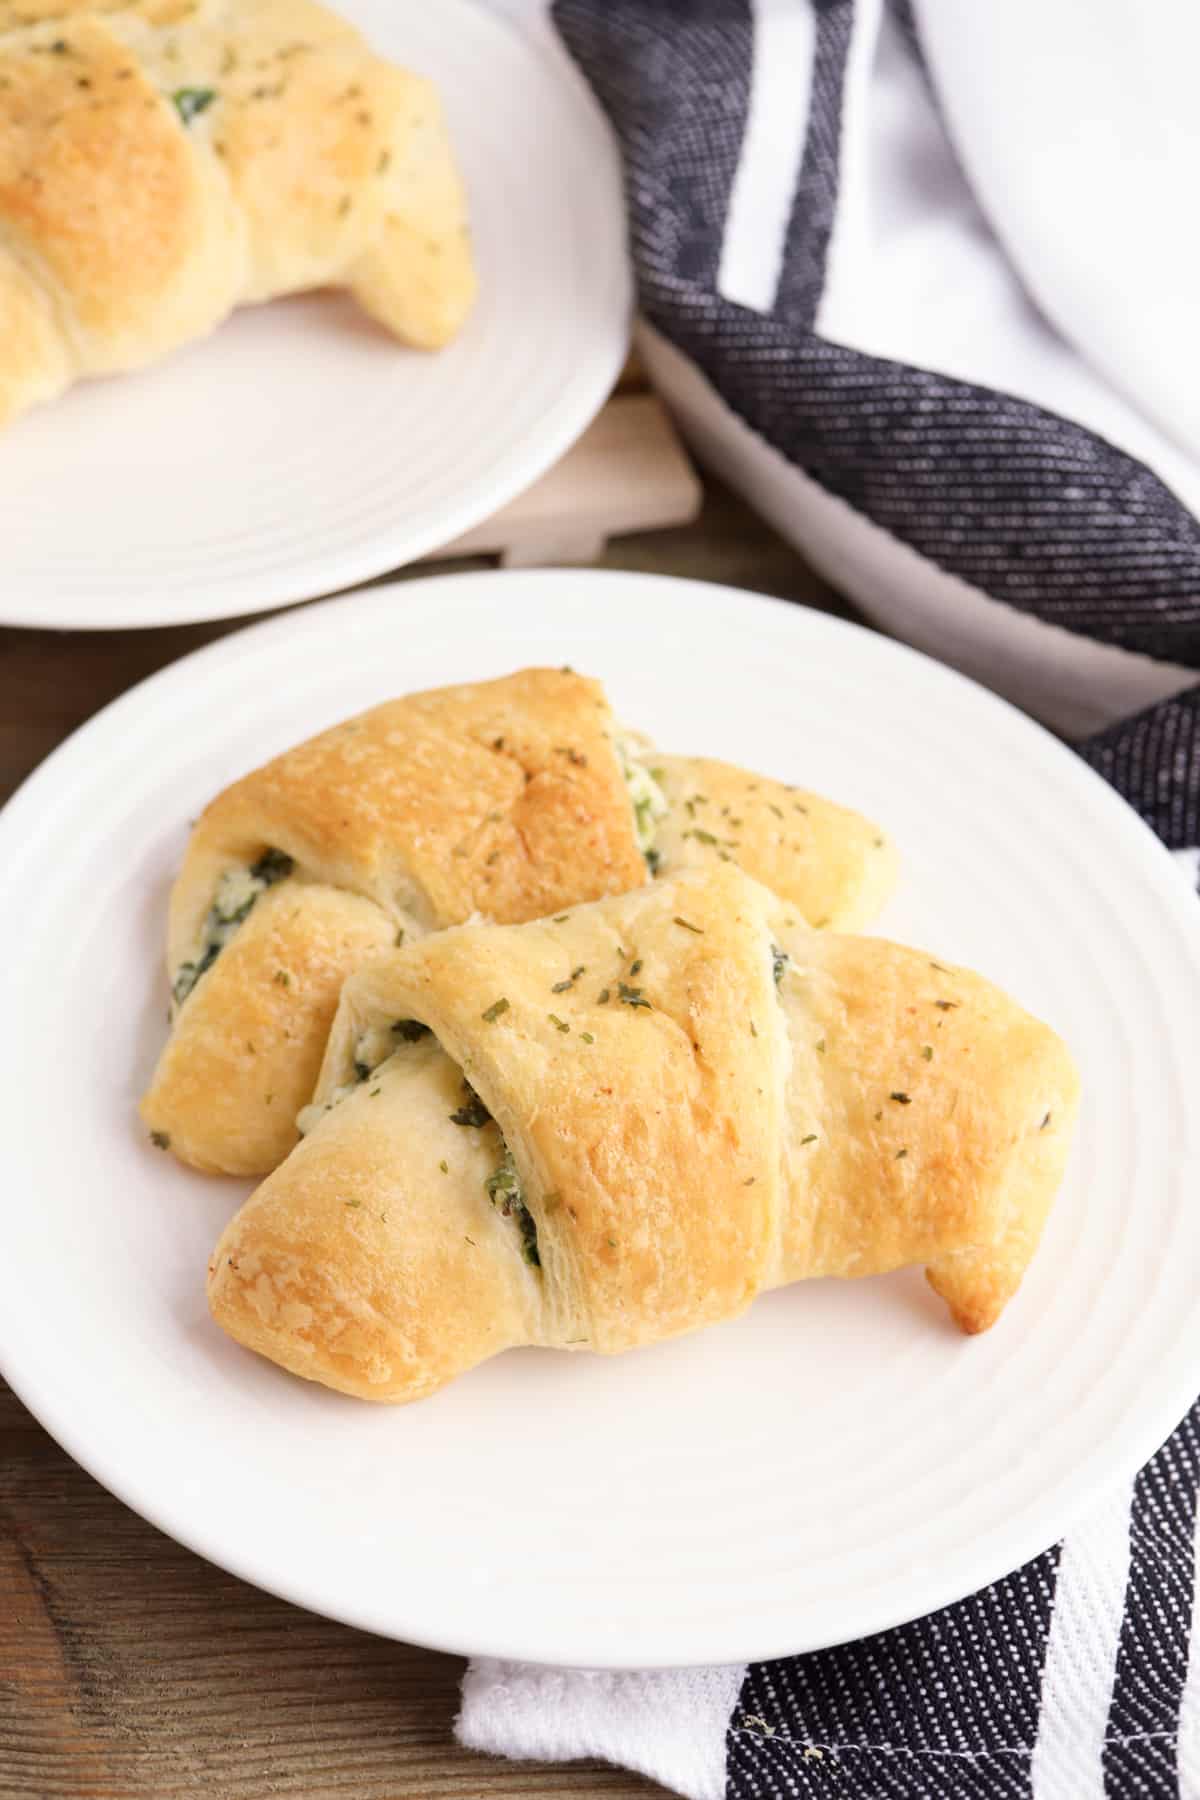 Spinach artichoke crescent rolls on whit plate with another plate of rolls in the background